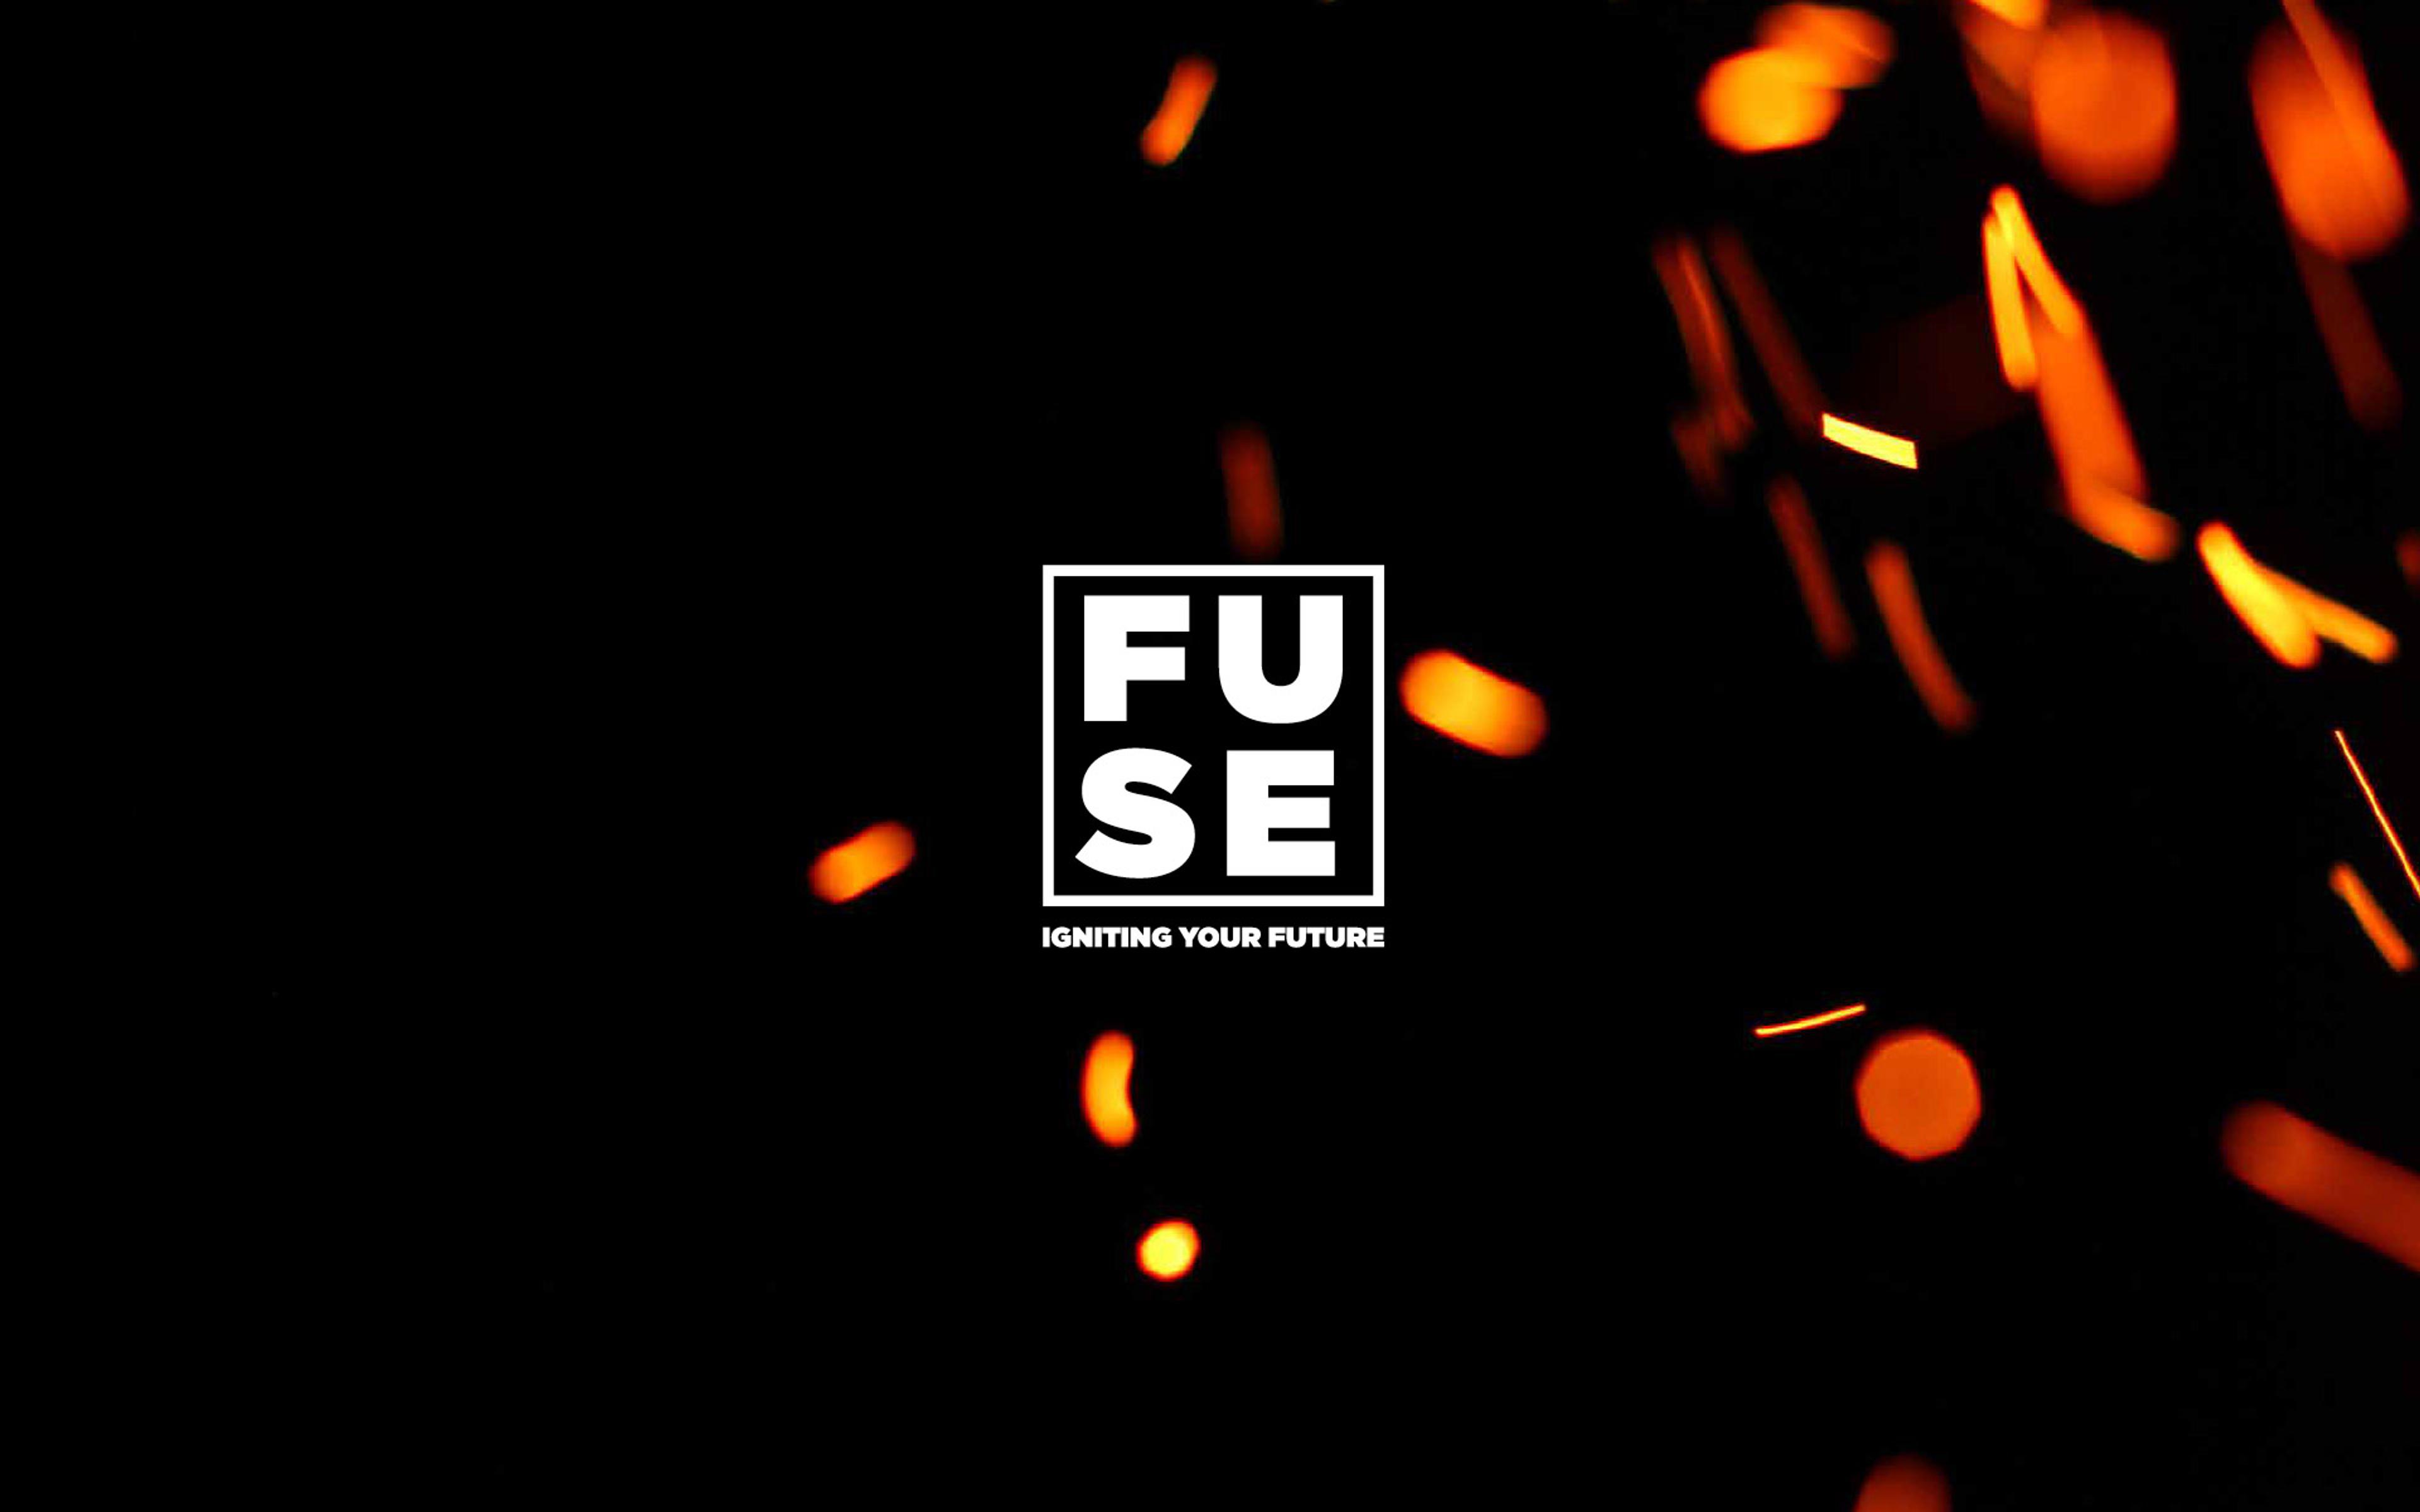 FUSE - Igniting your Future